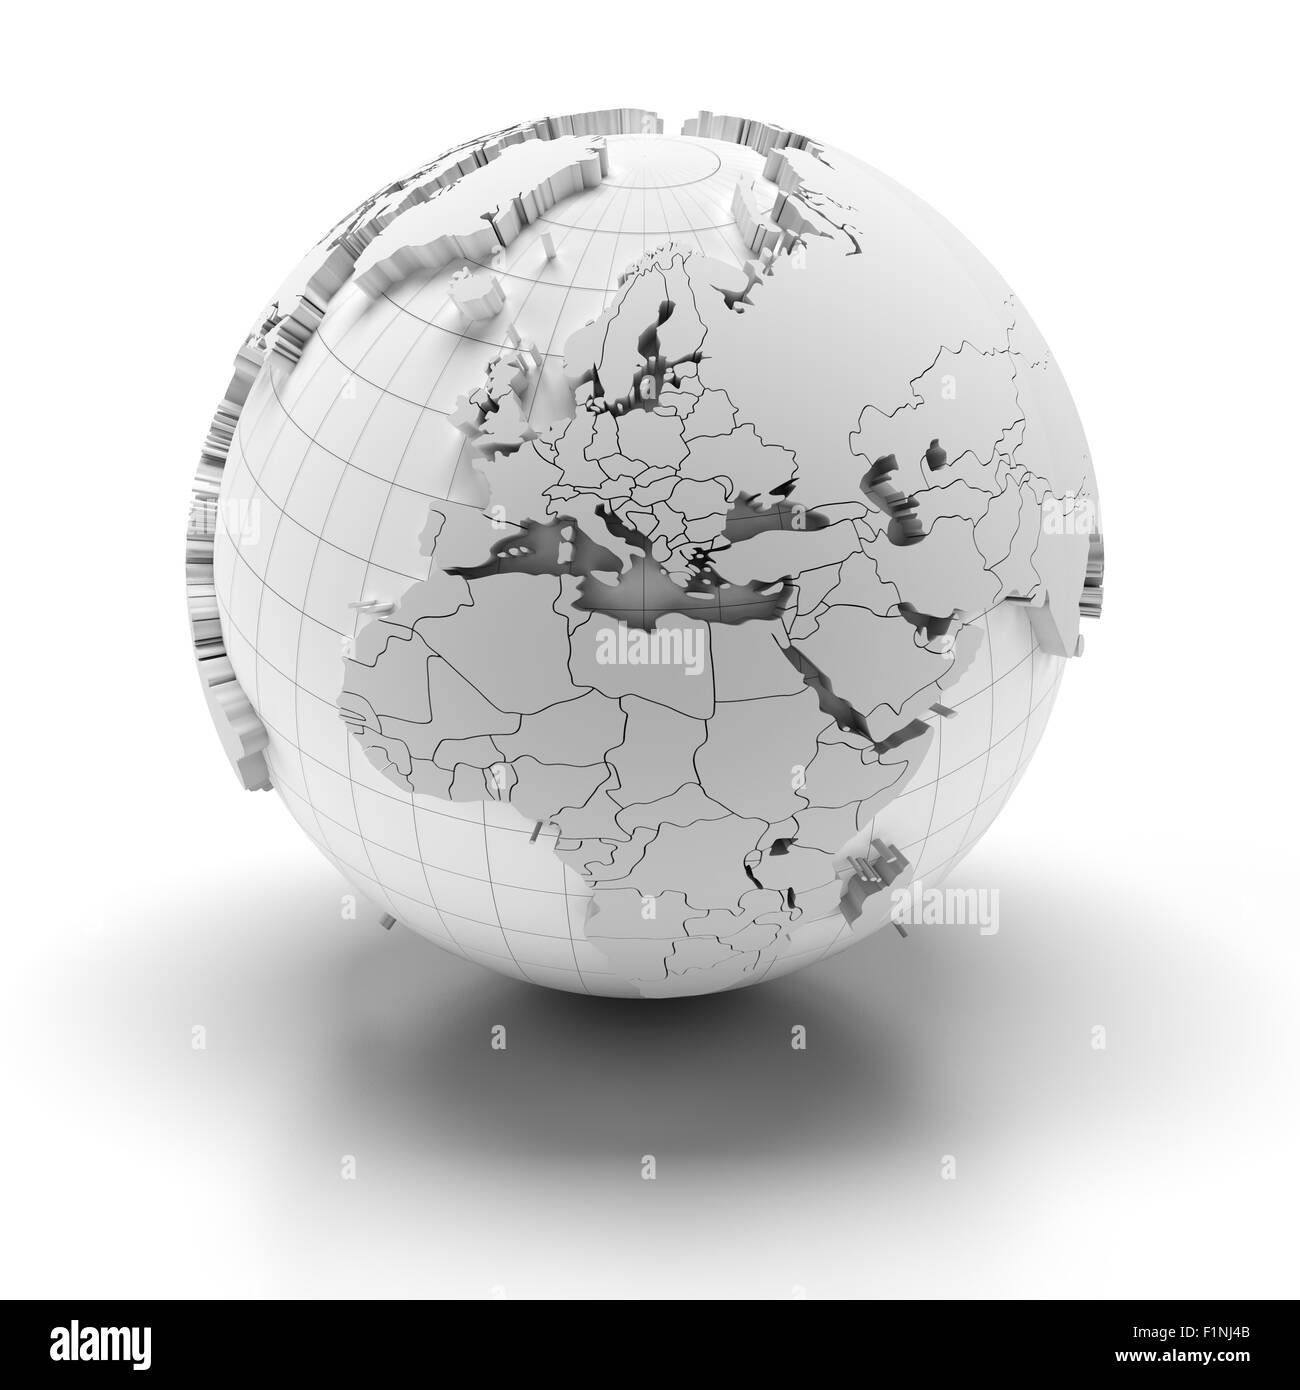 Globe with extruded continents, Europe, Middle East and Africa regions Stock Photo